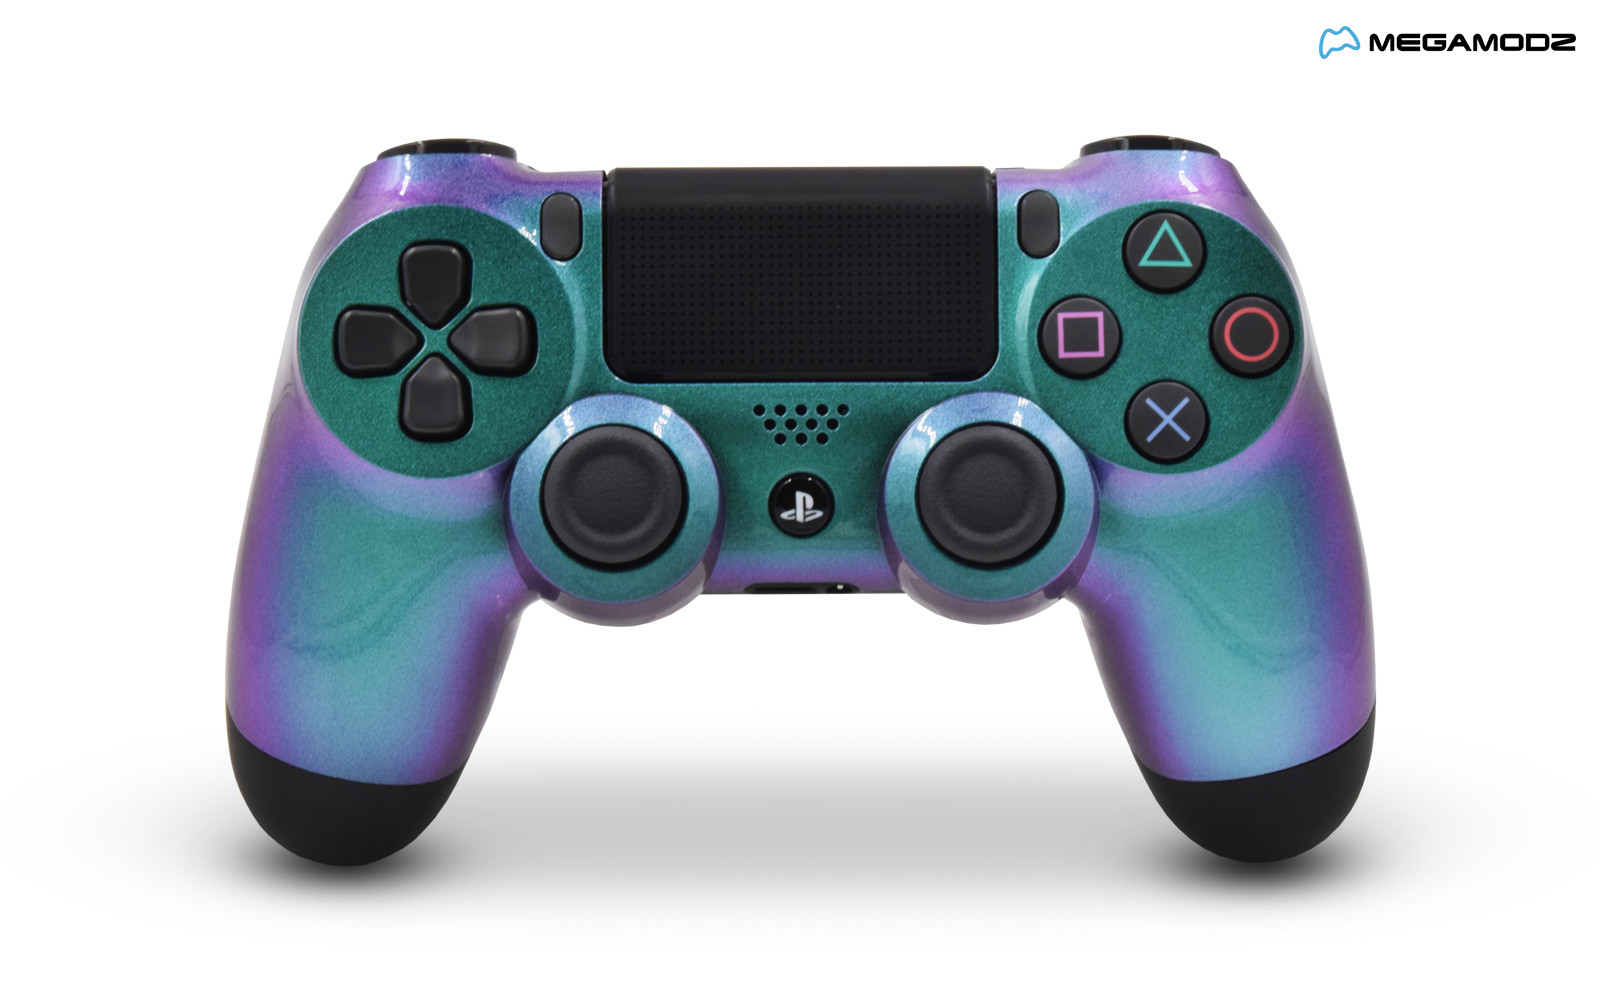 green and purple ps4 controller